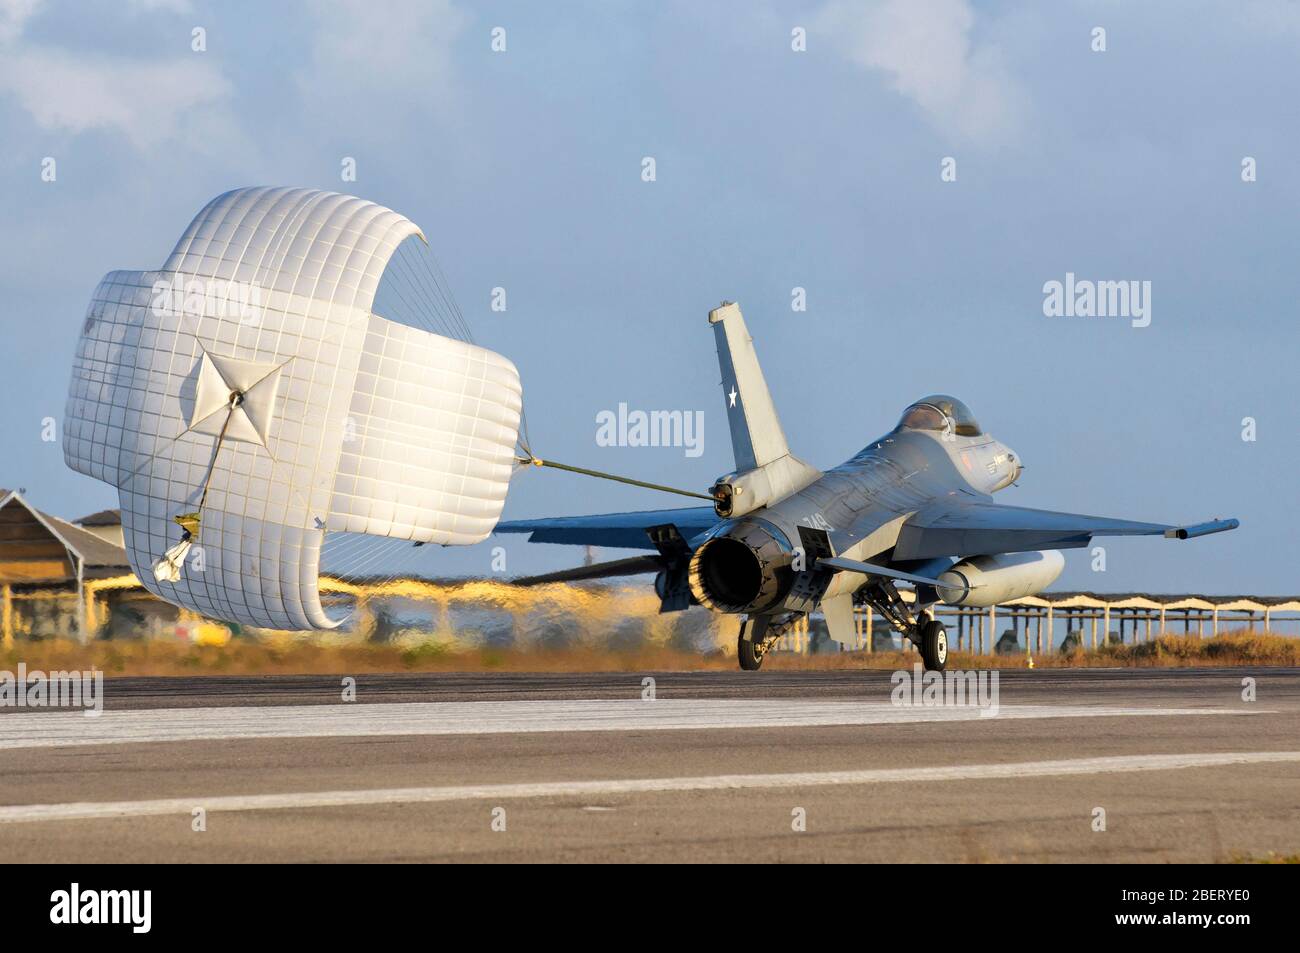 Chilean Air Force F-16 deploying its drag chute. Stock Photo